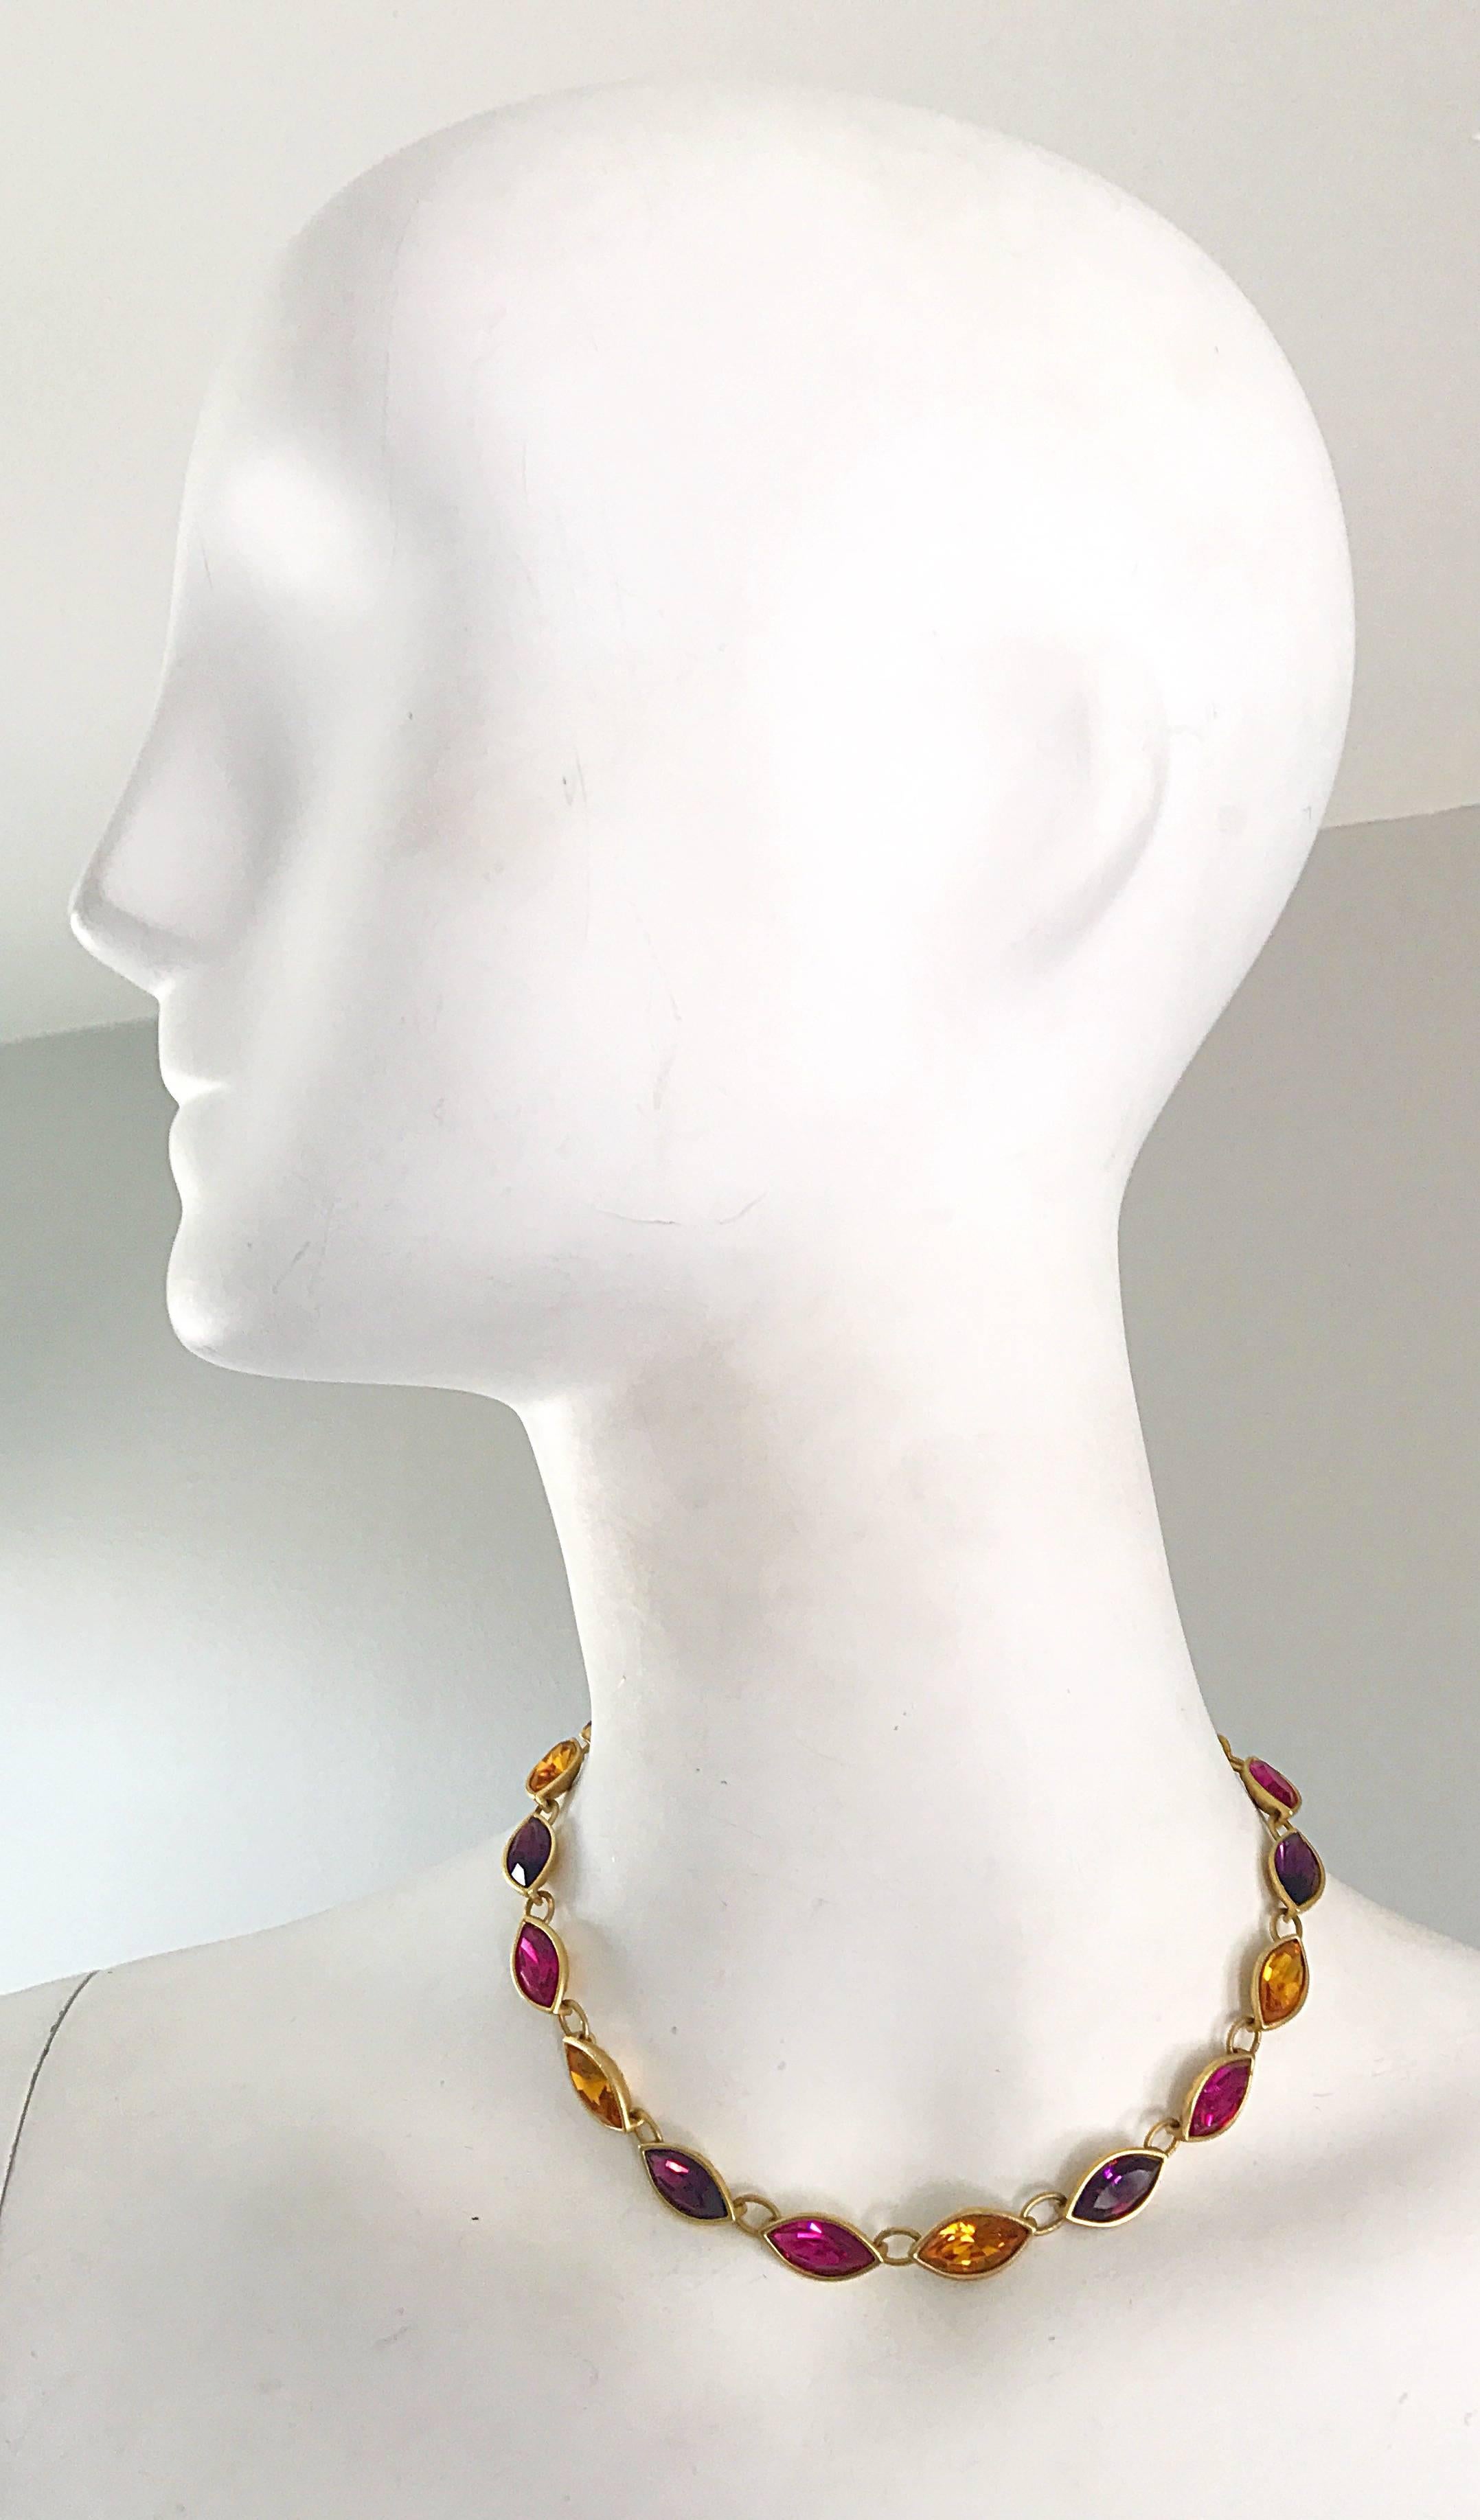 Gorgeous vintage YVES SAINT LAURENT purple, fuchsia pink, and yellow citrine crystal choker necklace! Gold chain with the YSL logo at the clasp. Oval shape crystals sparkle beautifully when hit by light! Can really add just that little extra pop to